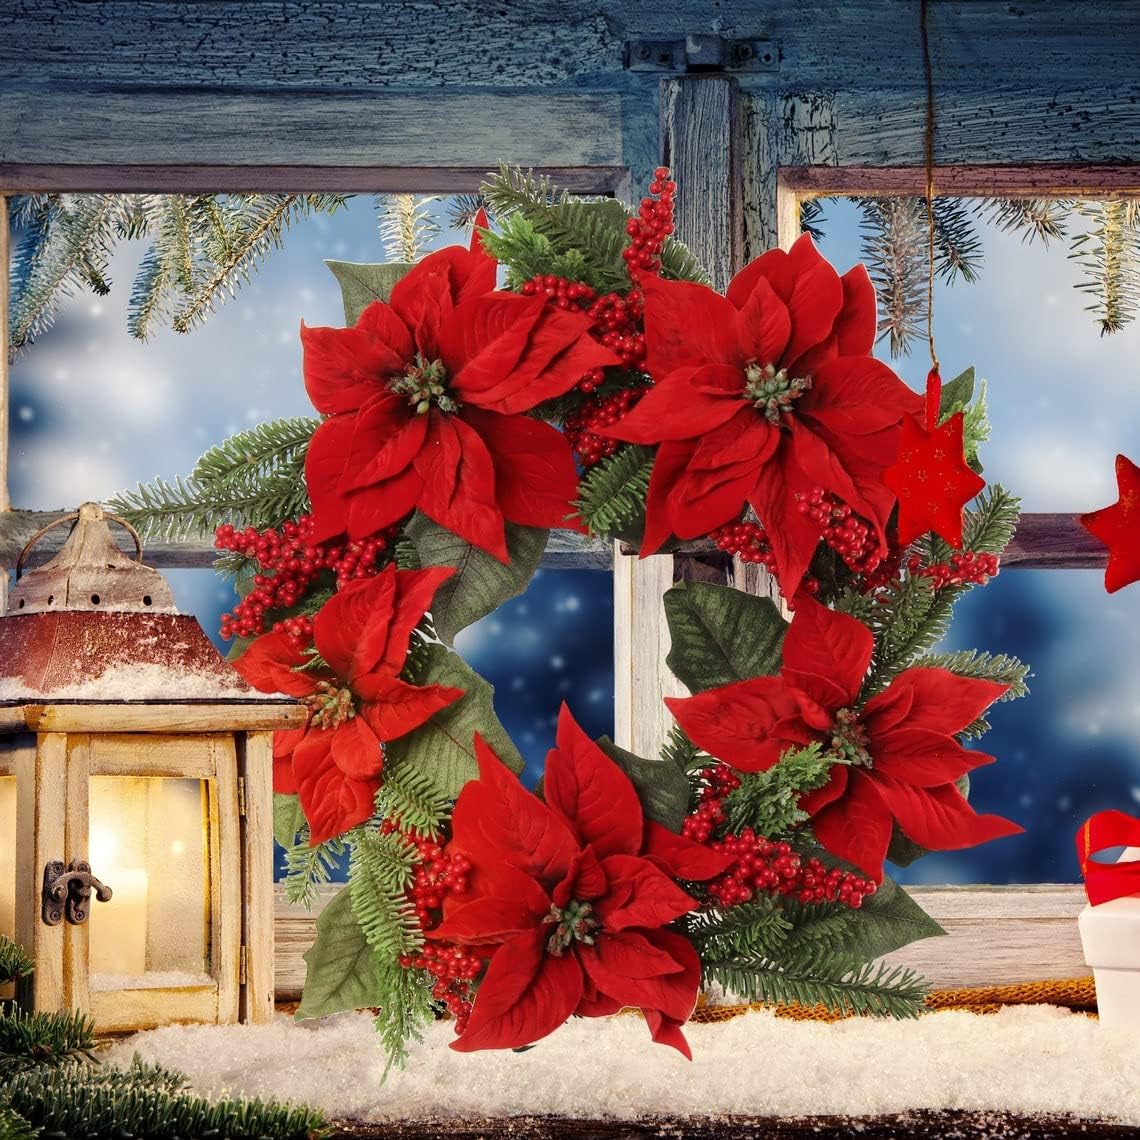 Premium Handcrafted 22-Inch Festive Wreath with Vibrant Poinsettias, Lush Pine, and Rich Berries - Ideal for Christmas and Winter Holiday Home Deco